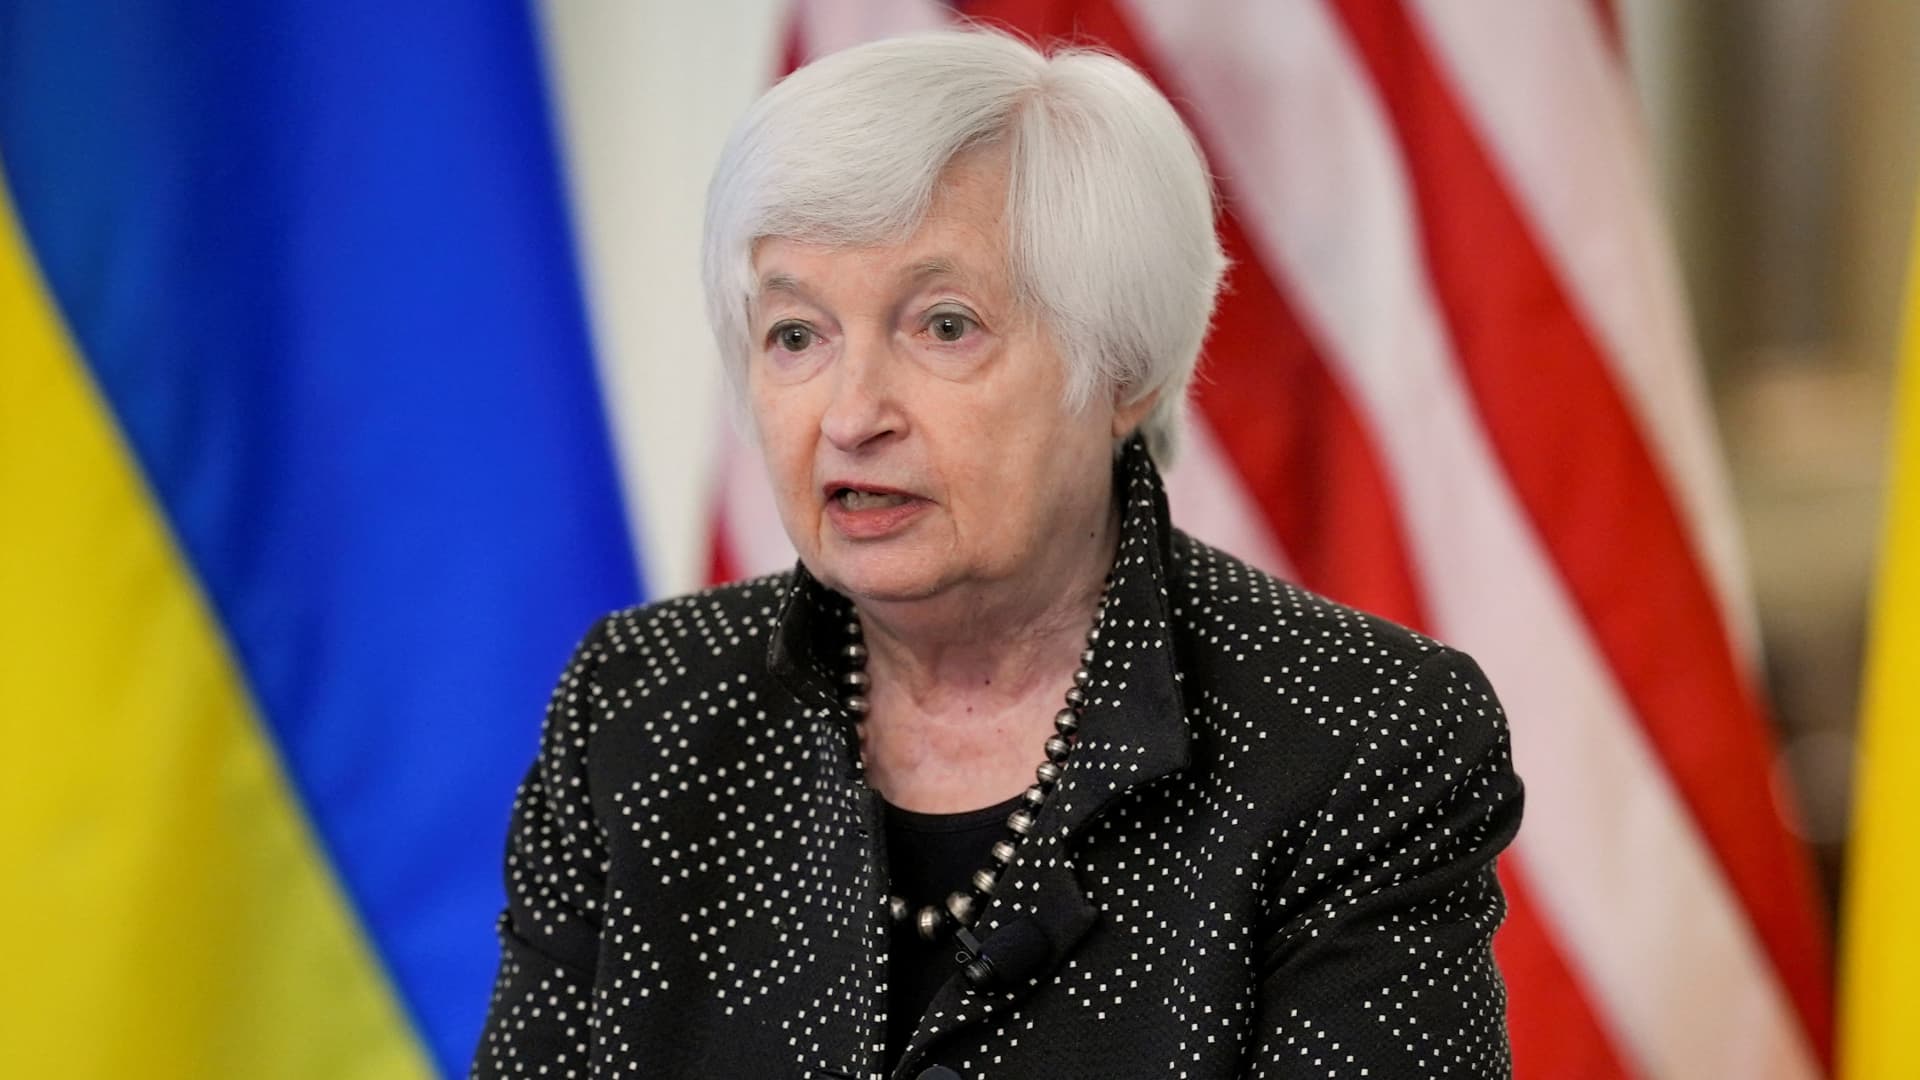 Yellen says ‘hard choices’ will need to be made if debt ceiling is not raised